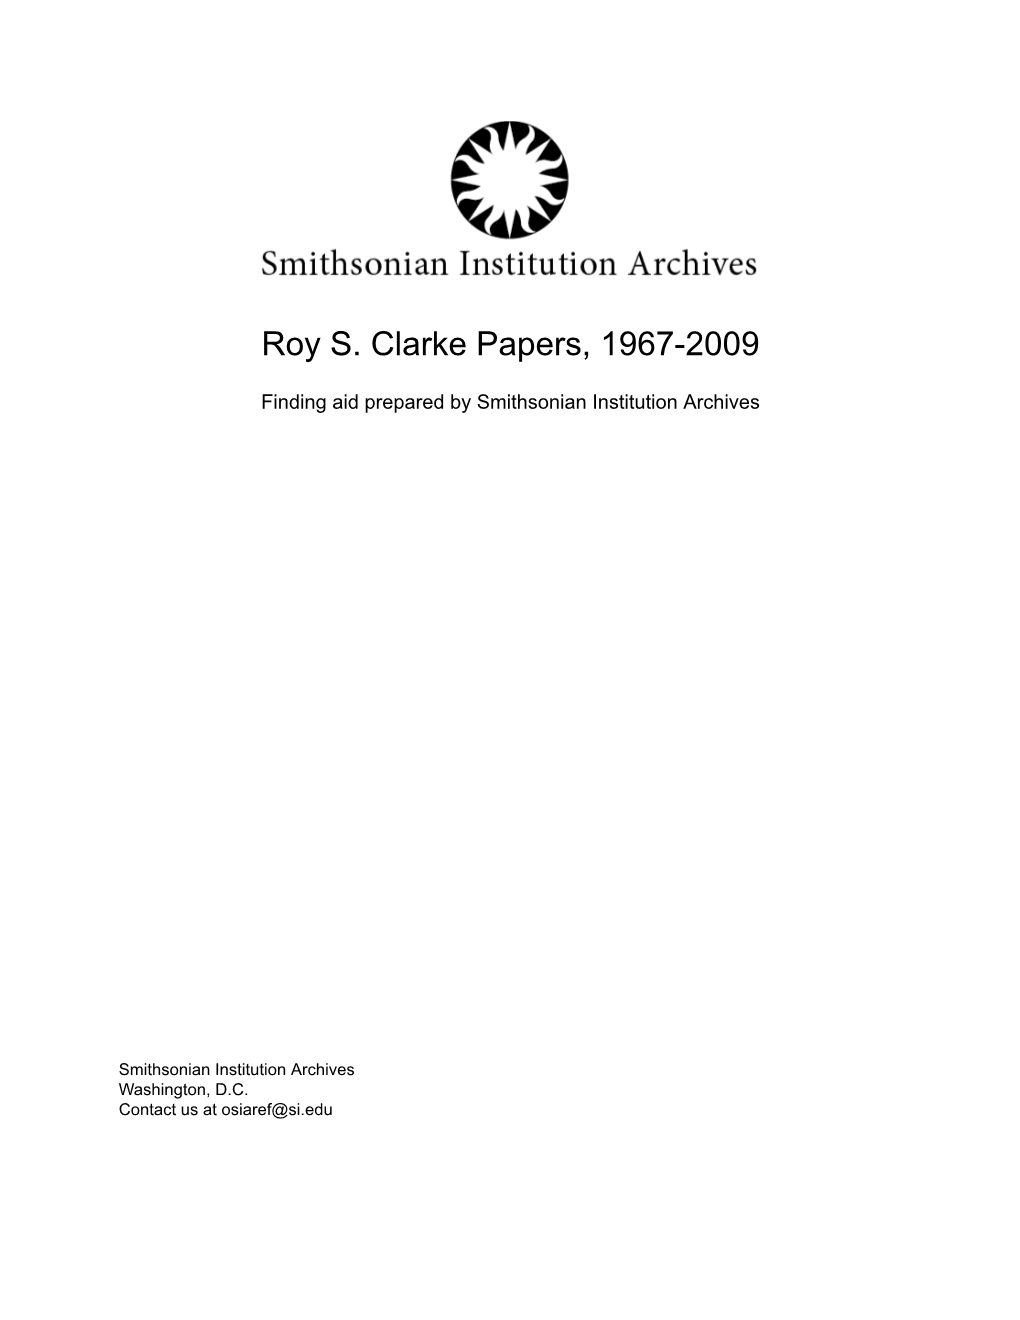 Roy S. Clarke Papers, 1967-2009